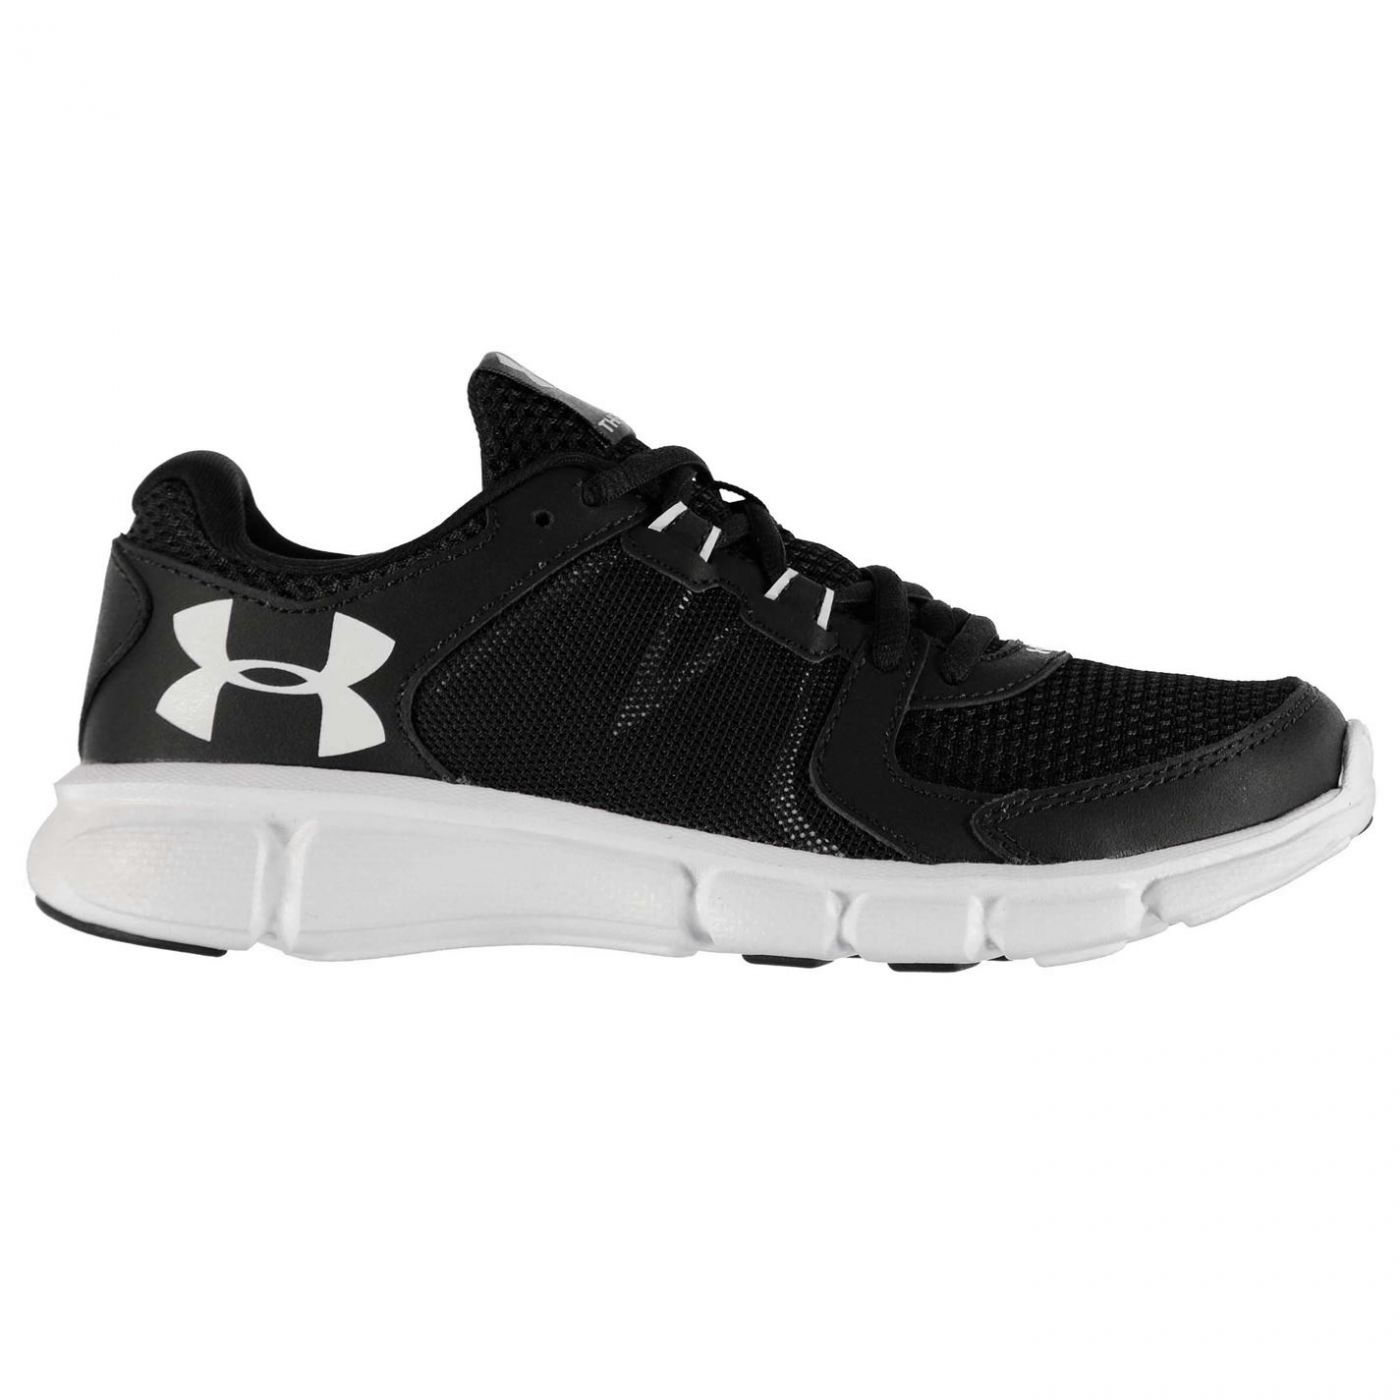 Under Armour Thrill 2 Running Shoes Ladies